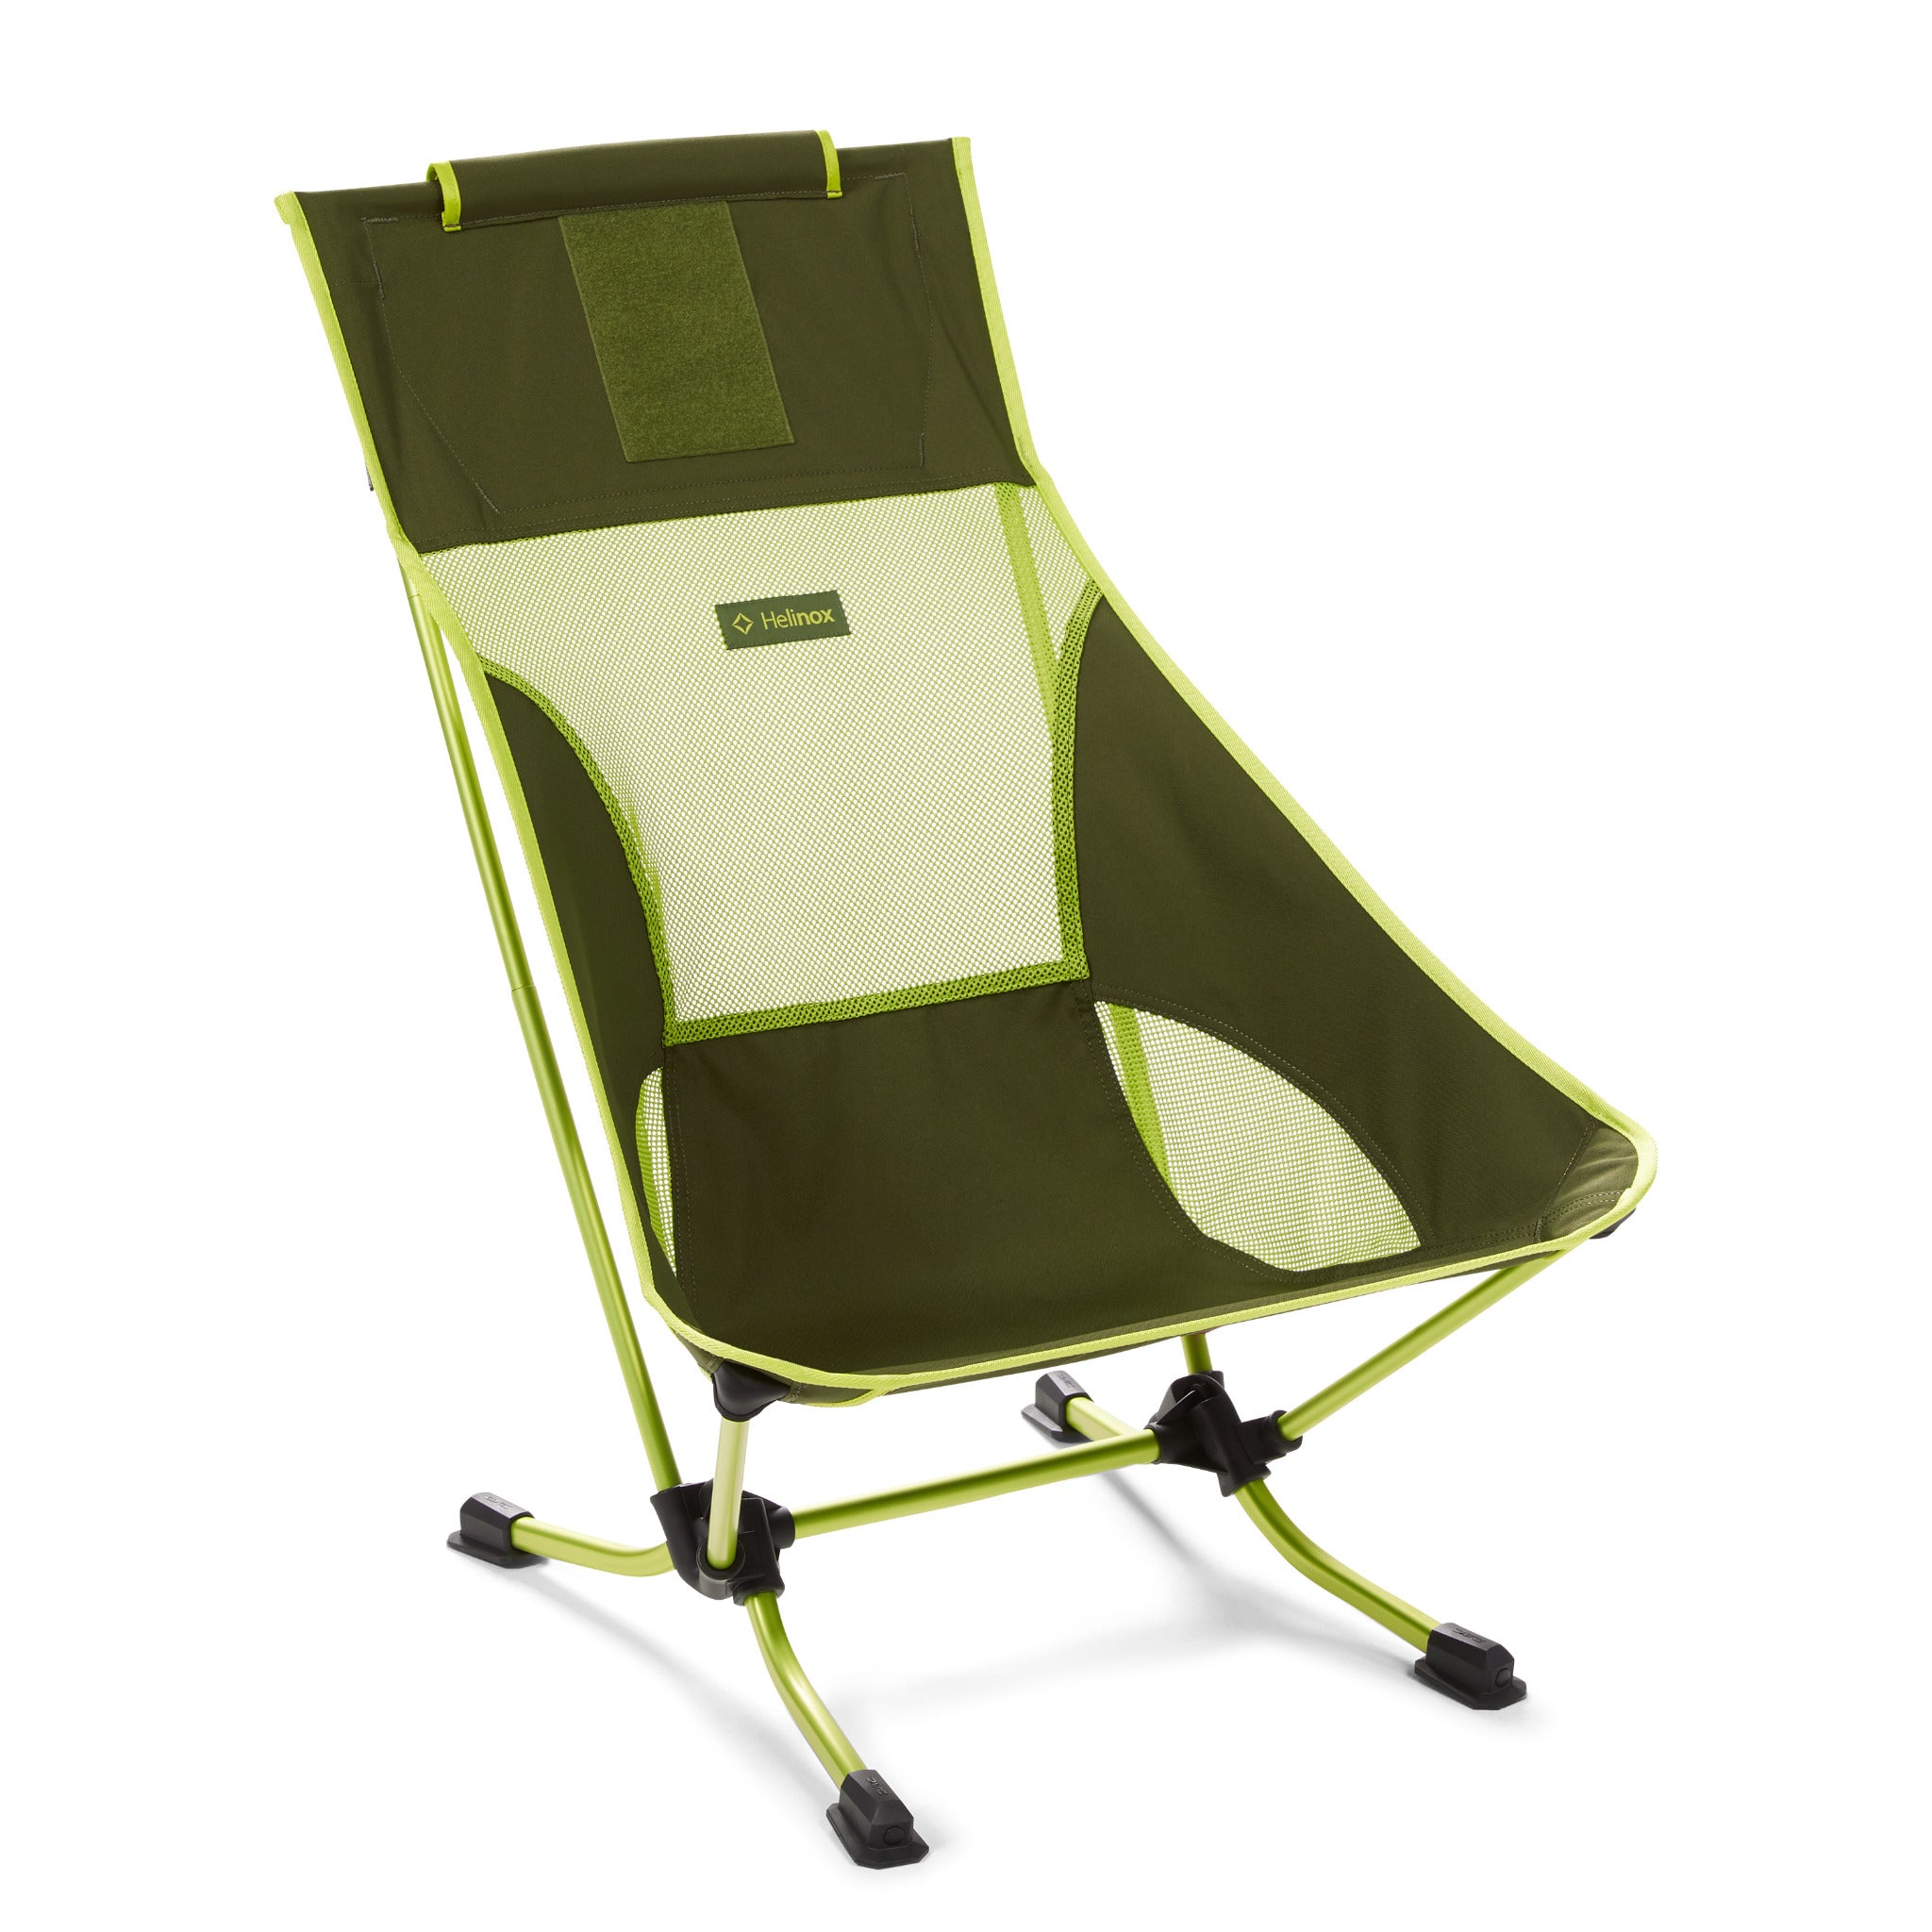 Minimalist Beach Chair Reviews 2017 for Small Space